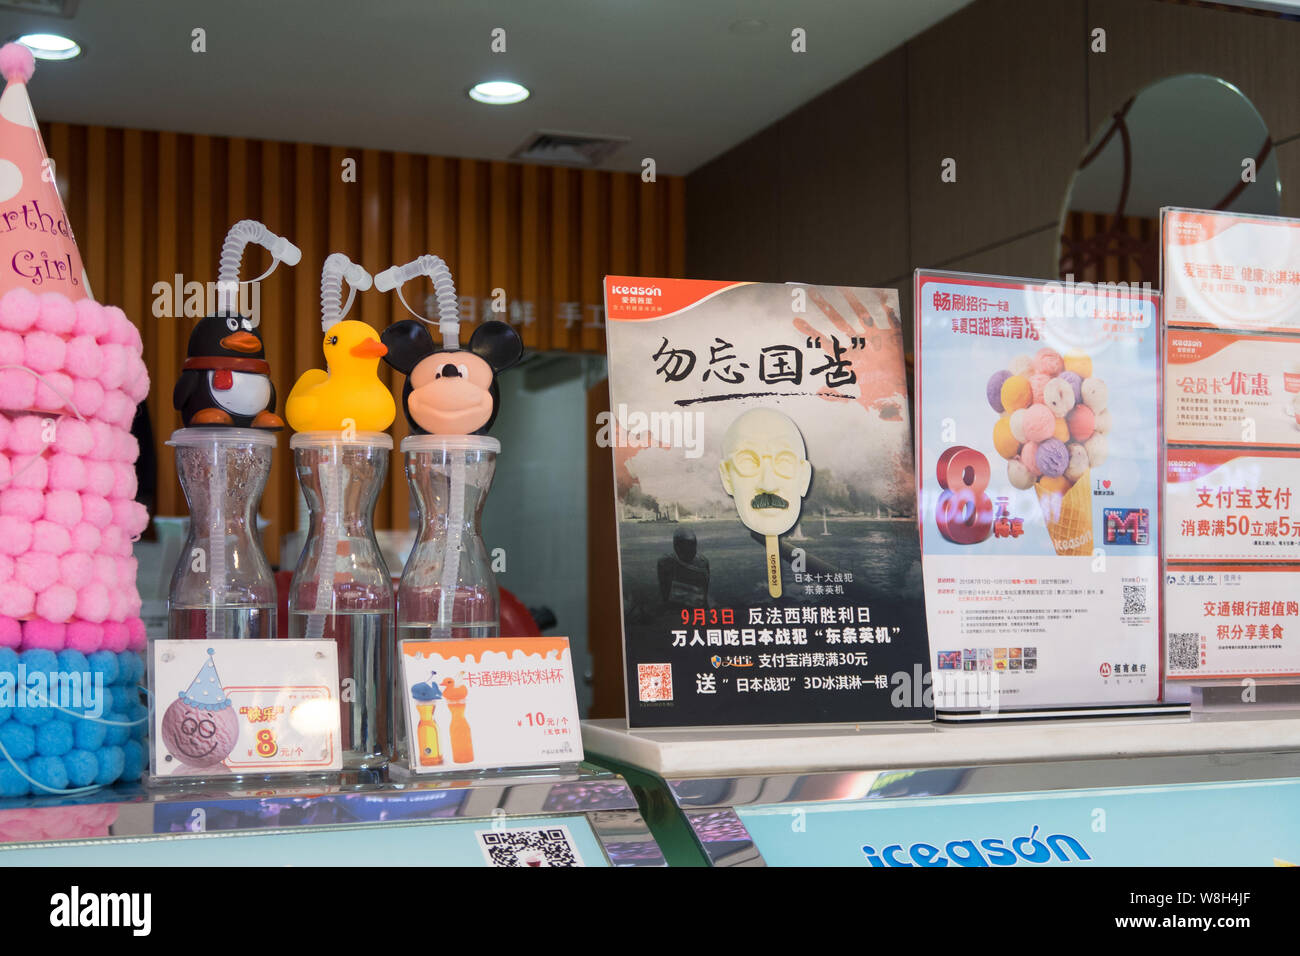 An advertisement for 3D-printed ice cream bars resembling Japanese military leader and war criminal Gen. Hideki Tojo is pictured at an Iceason ice-cre Stock Photo